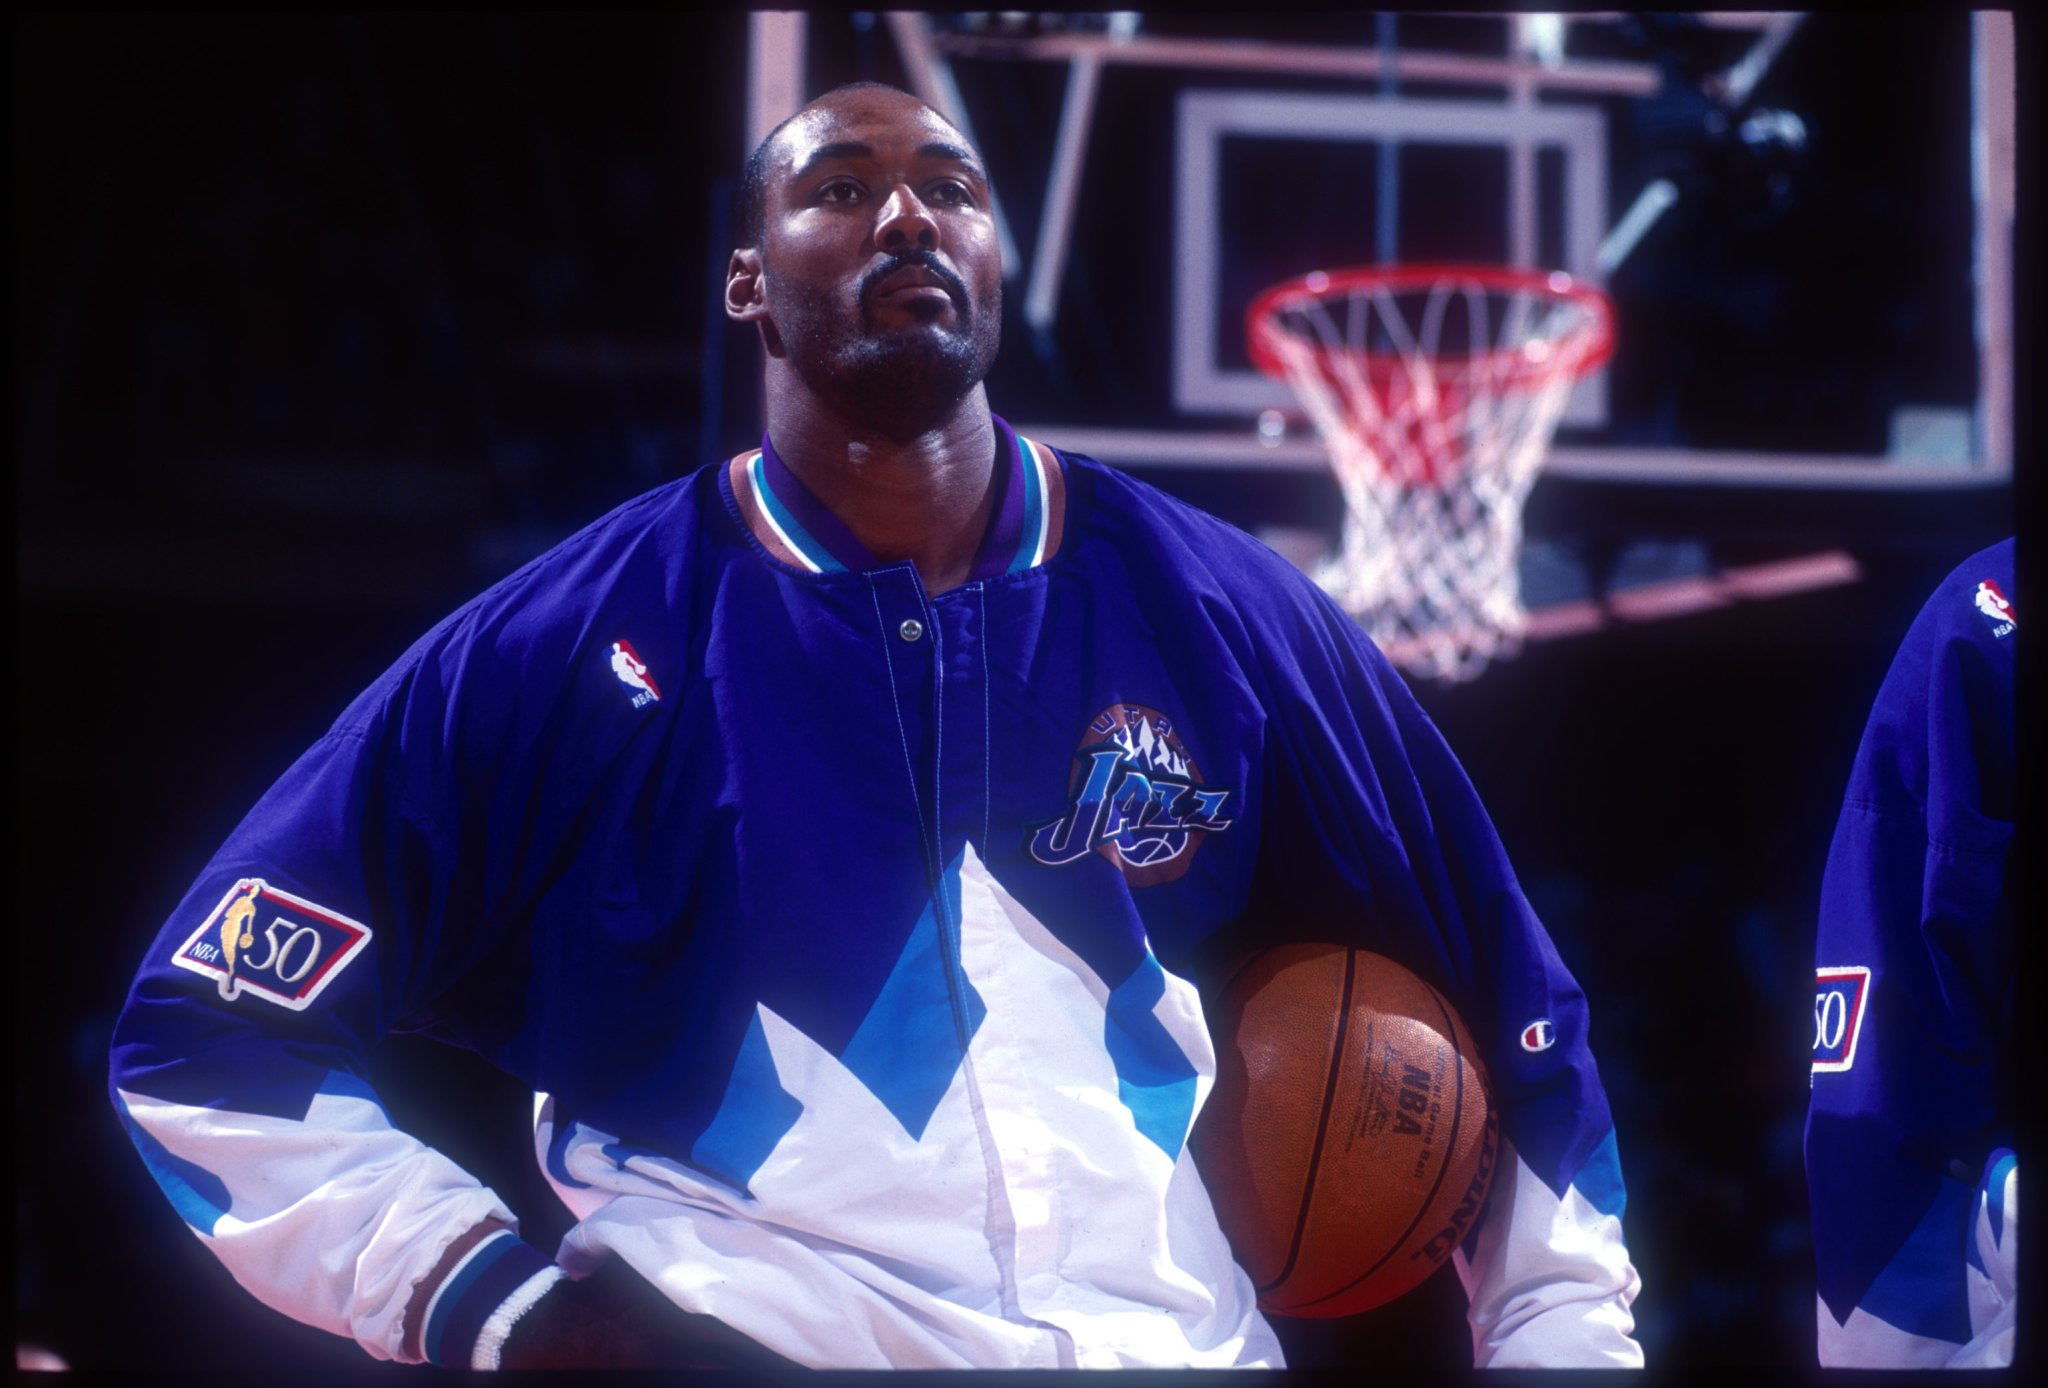 NBA Fans Slam Karl Malone Over His Shady Past After He Tried To Criticize Zion Williamson